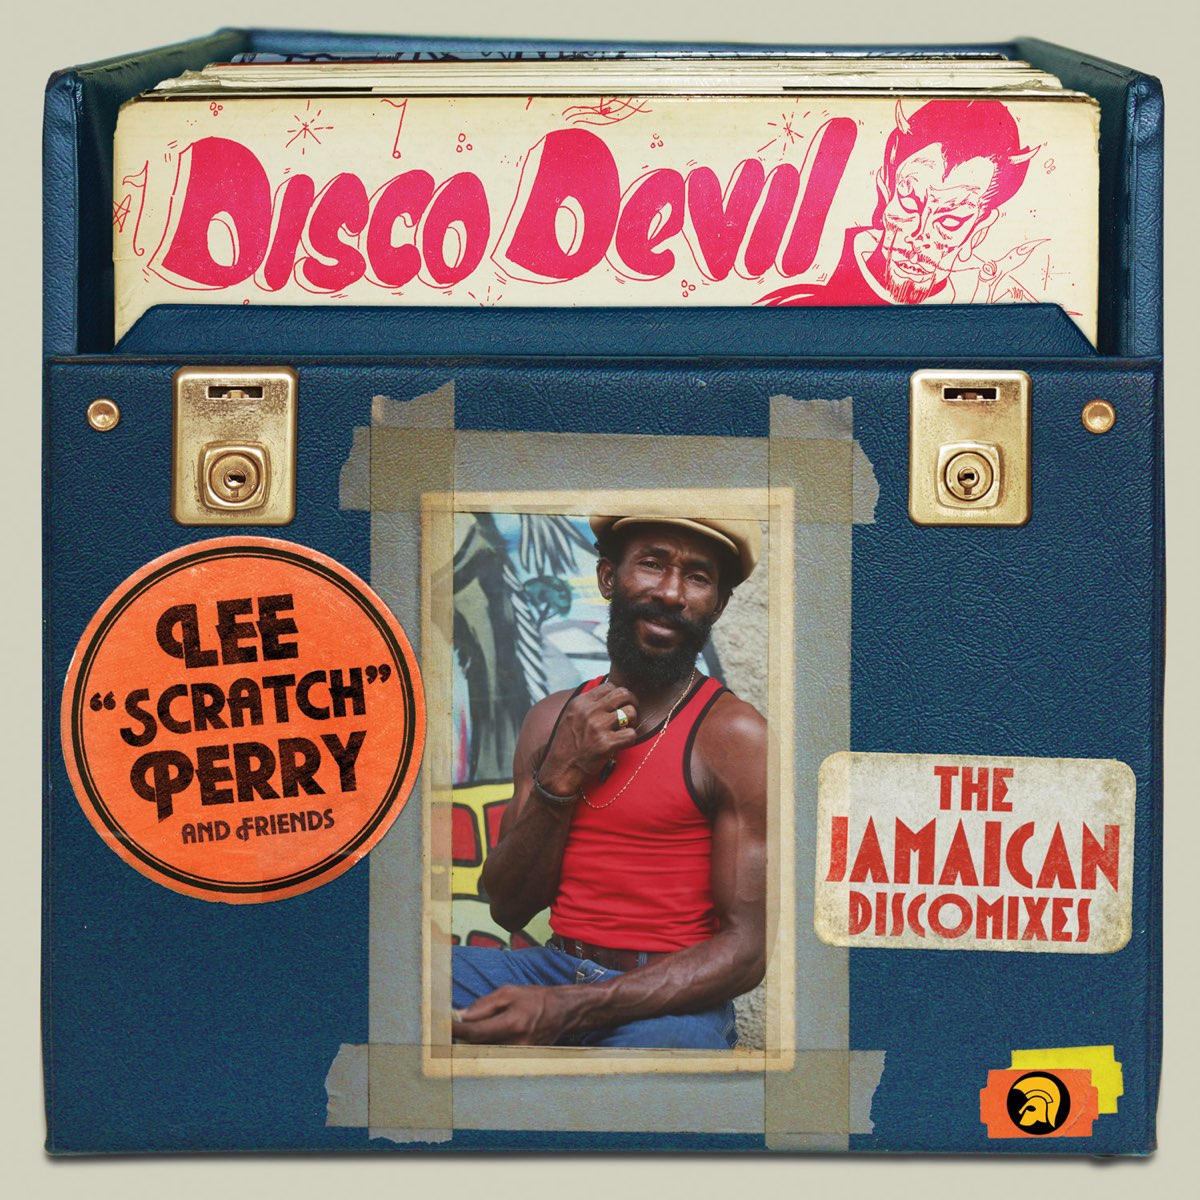 Release: Lee Scratch Perry and Friends - Disco Devil (The Jamaican 